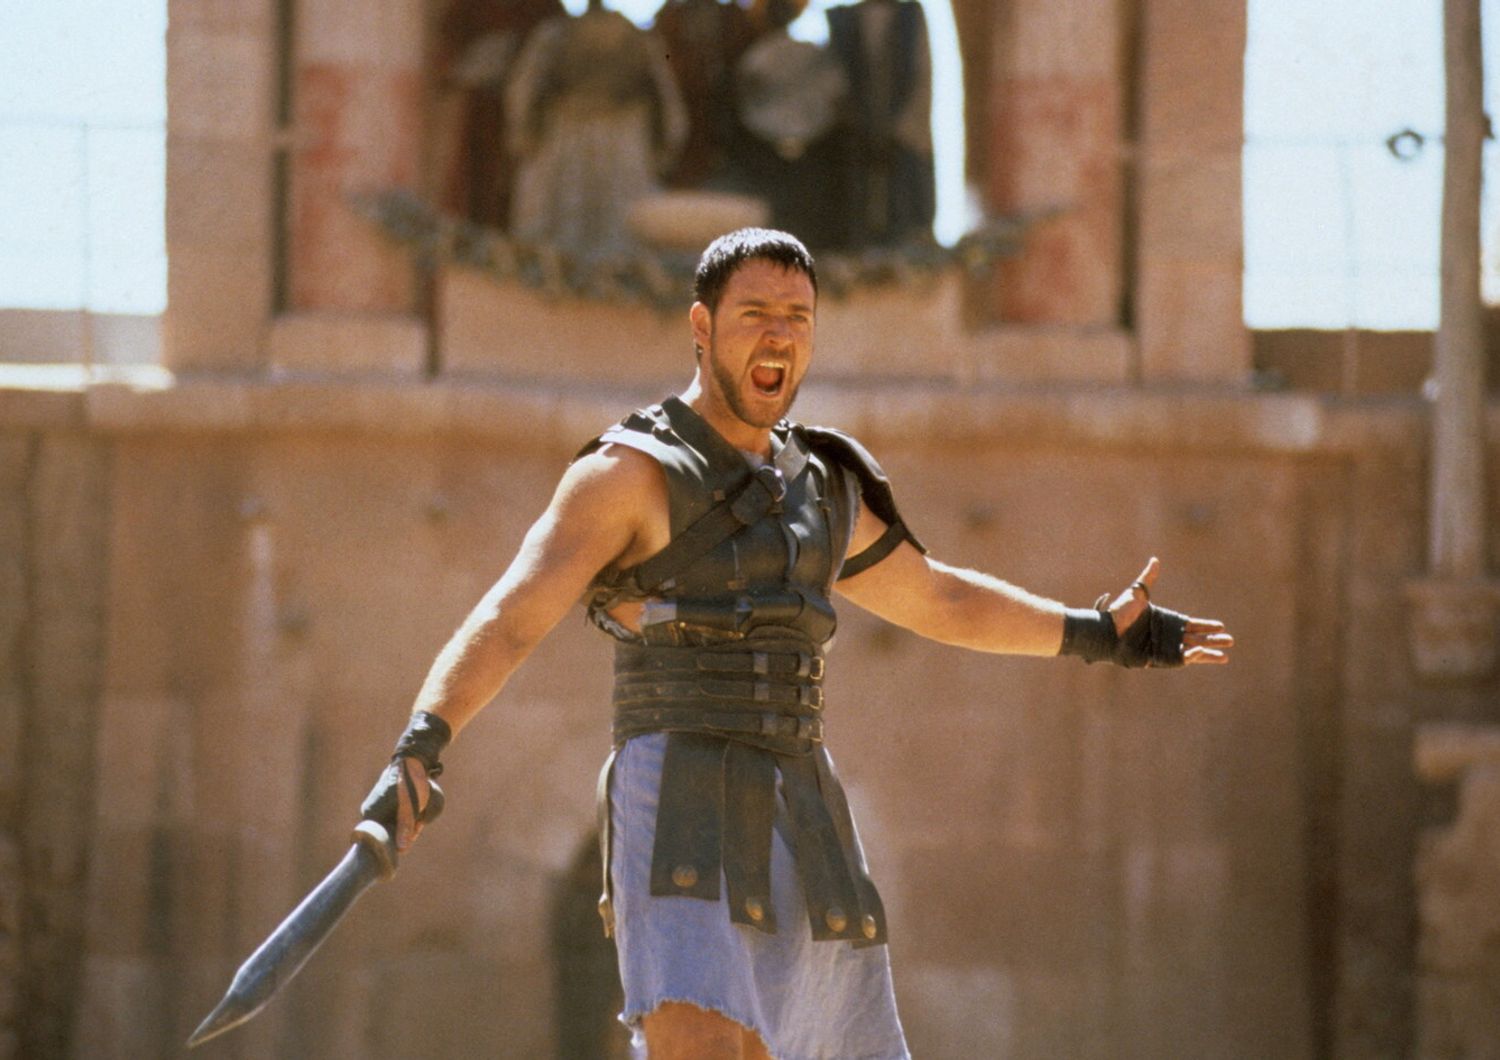 Russell Crowe, 'Il gladiatore'